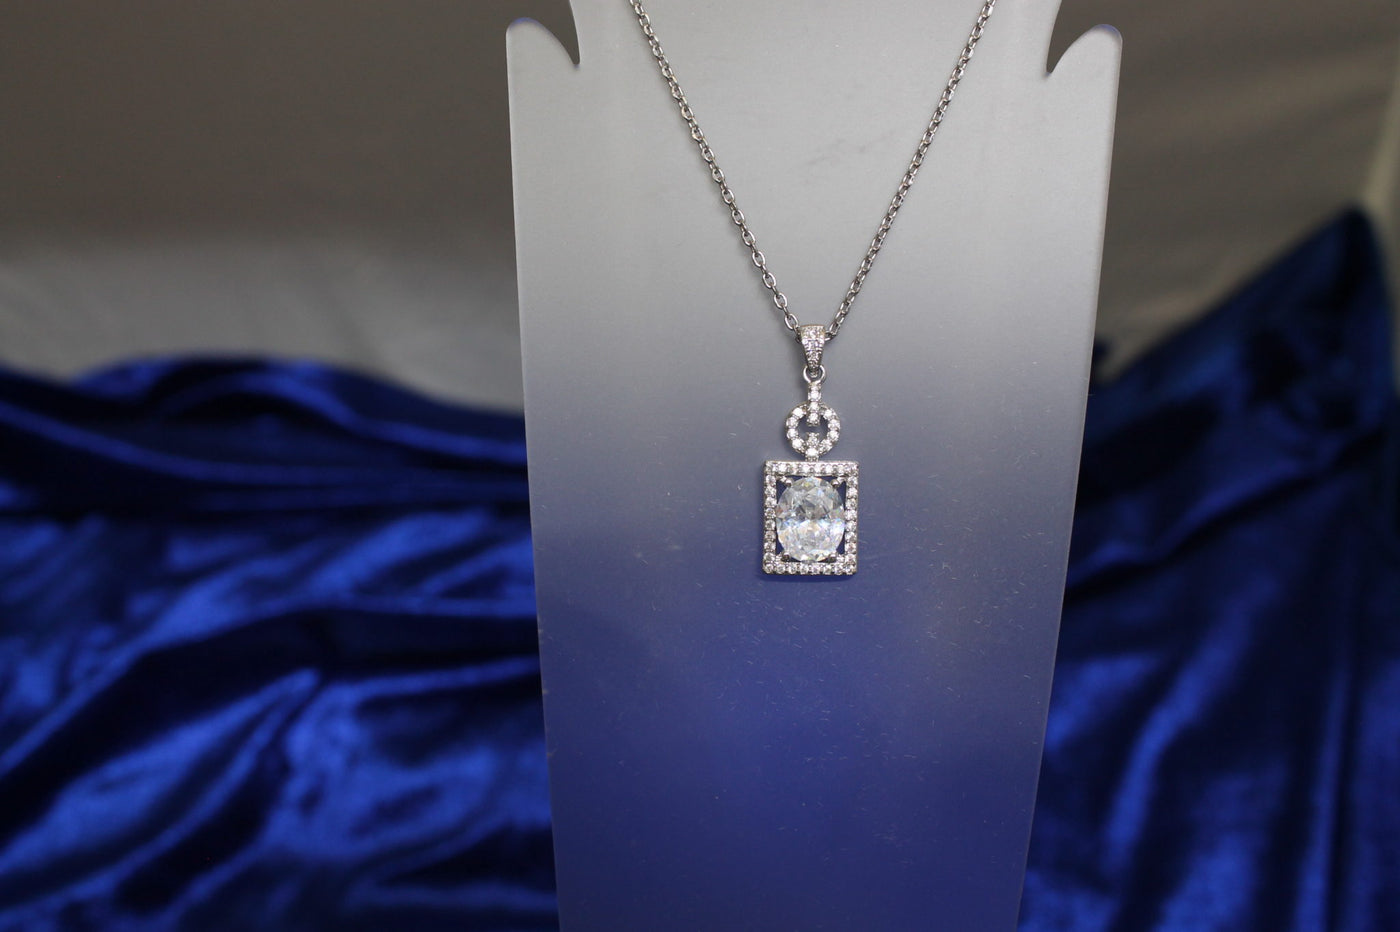 Pave Set Cubic Zirconia Pendant Necklace in Silver Tone